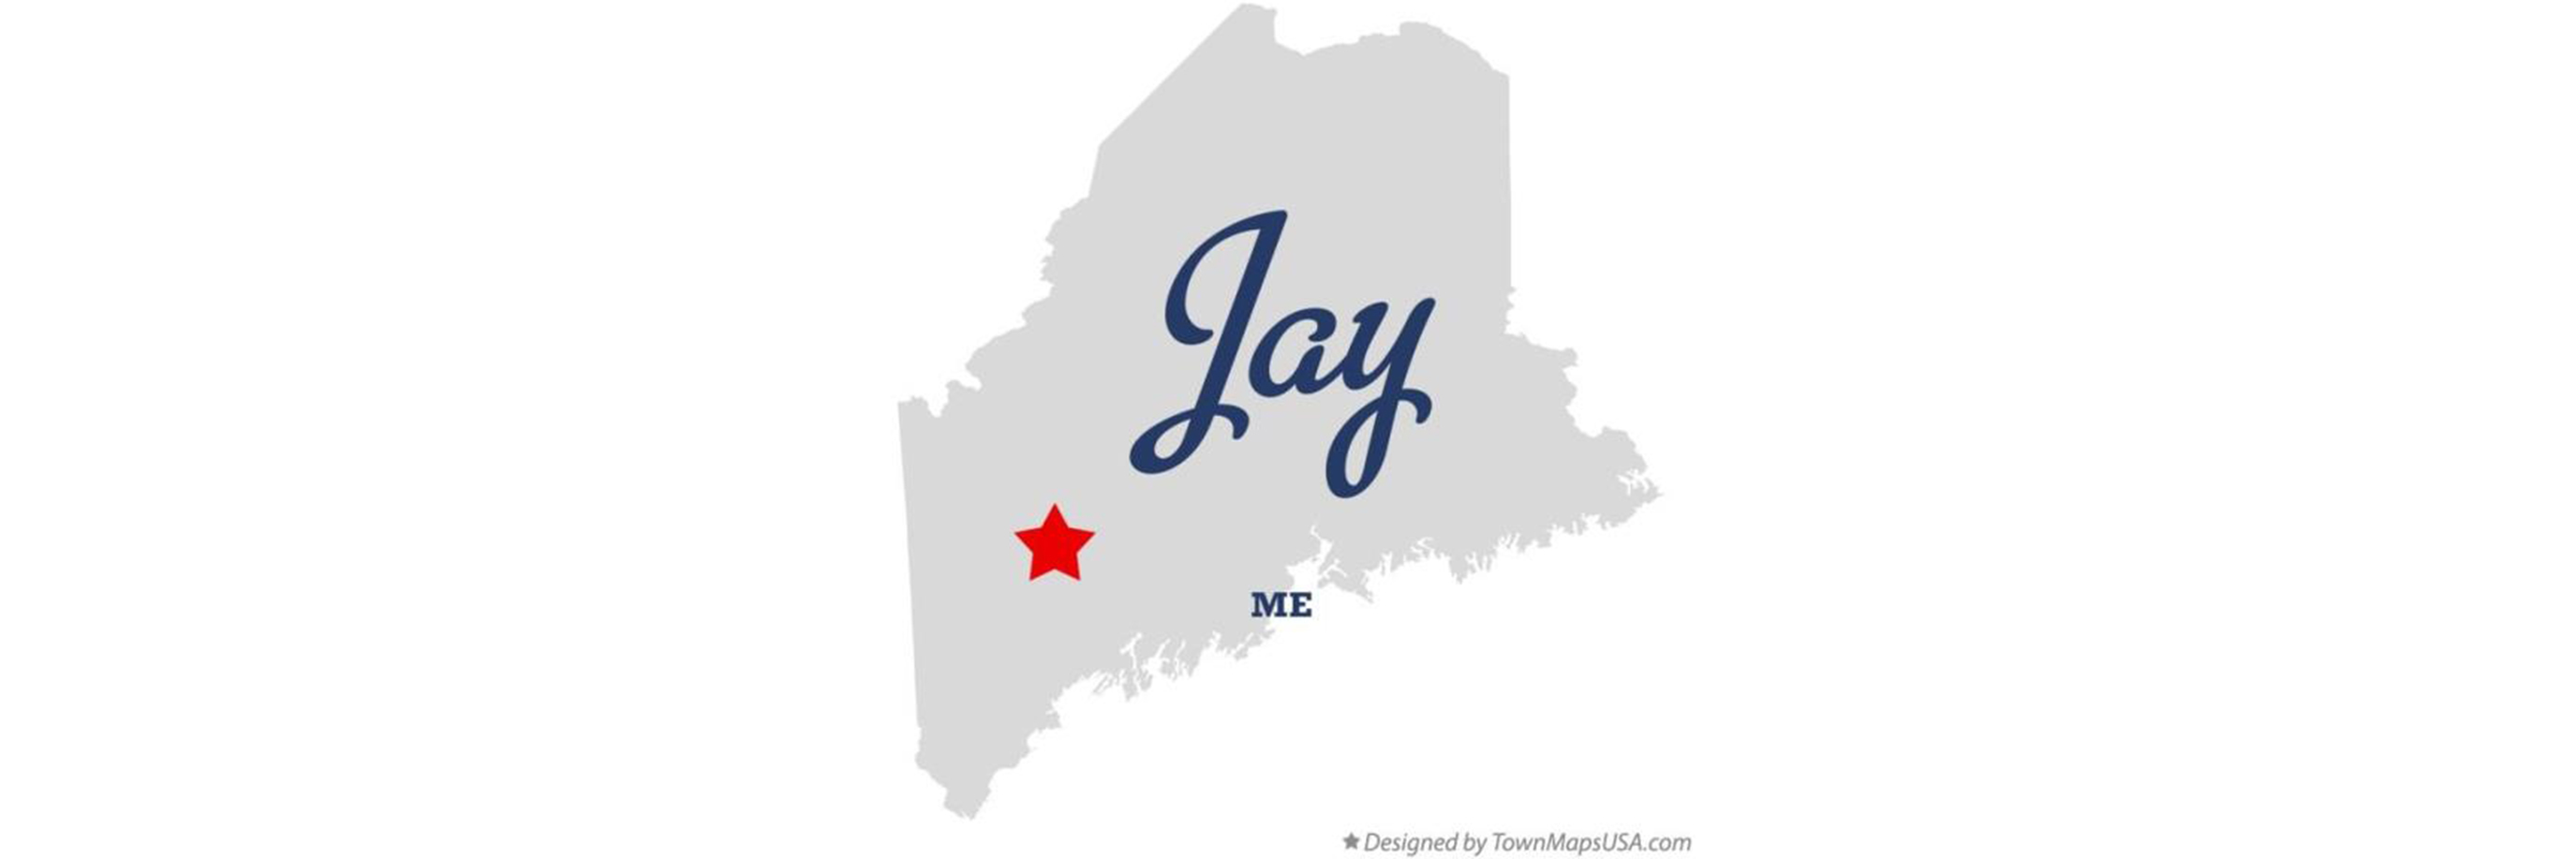 Town of Jay